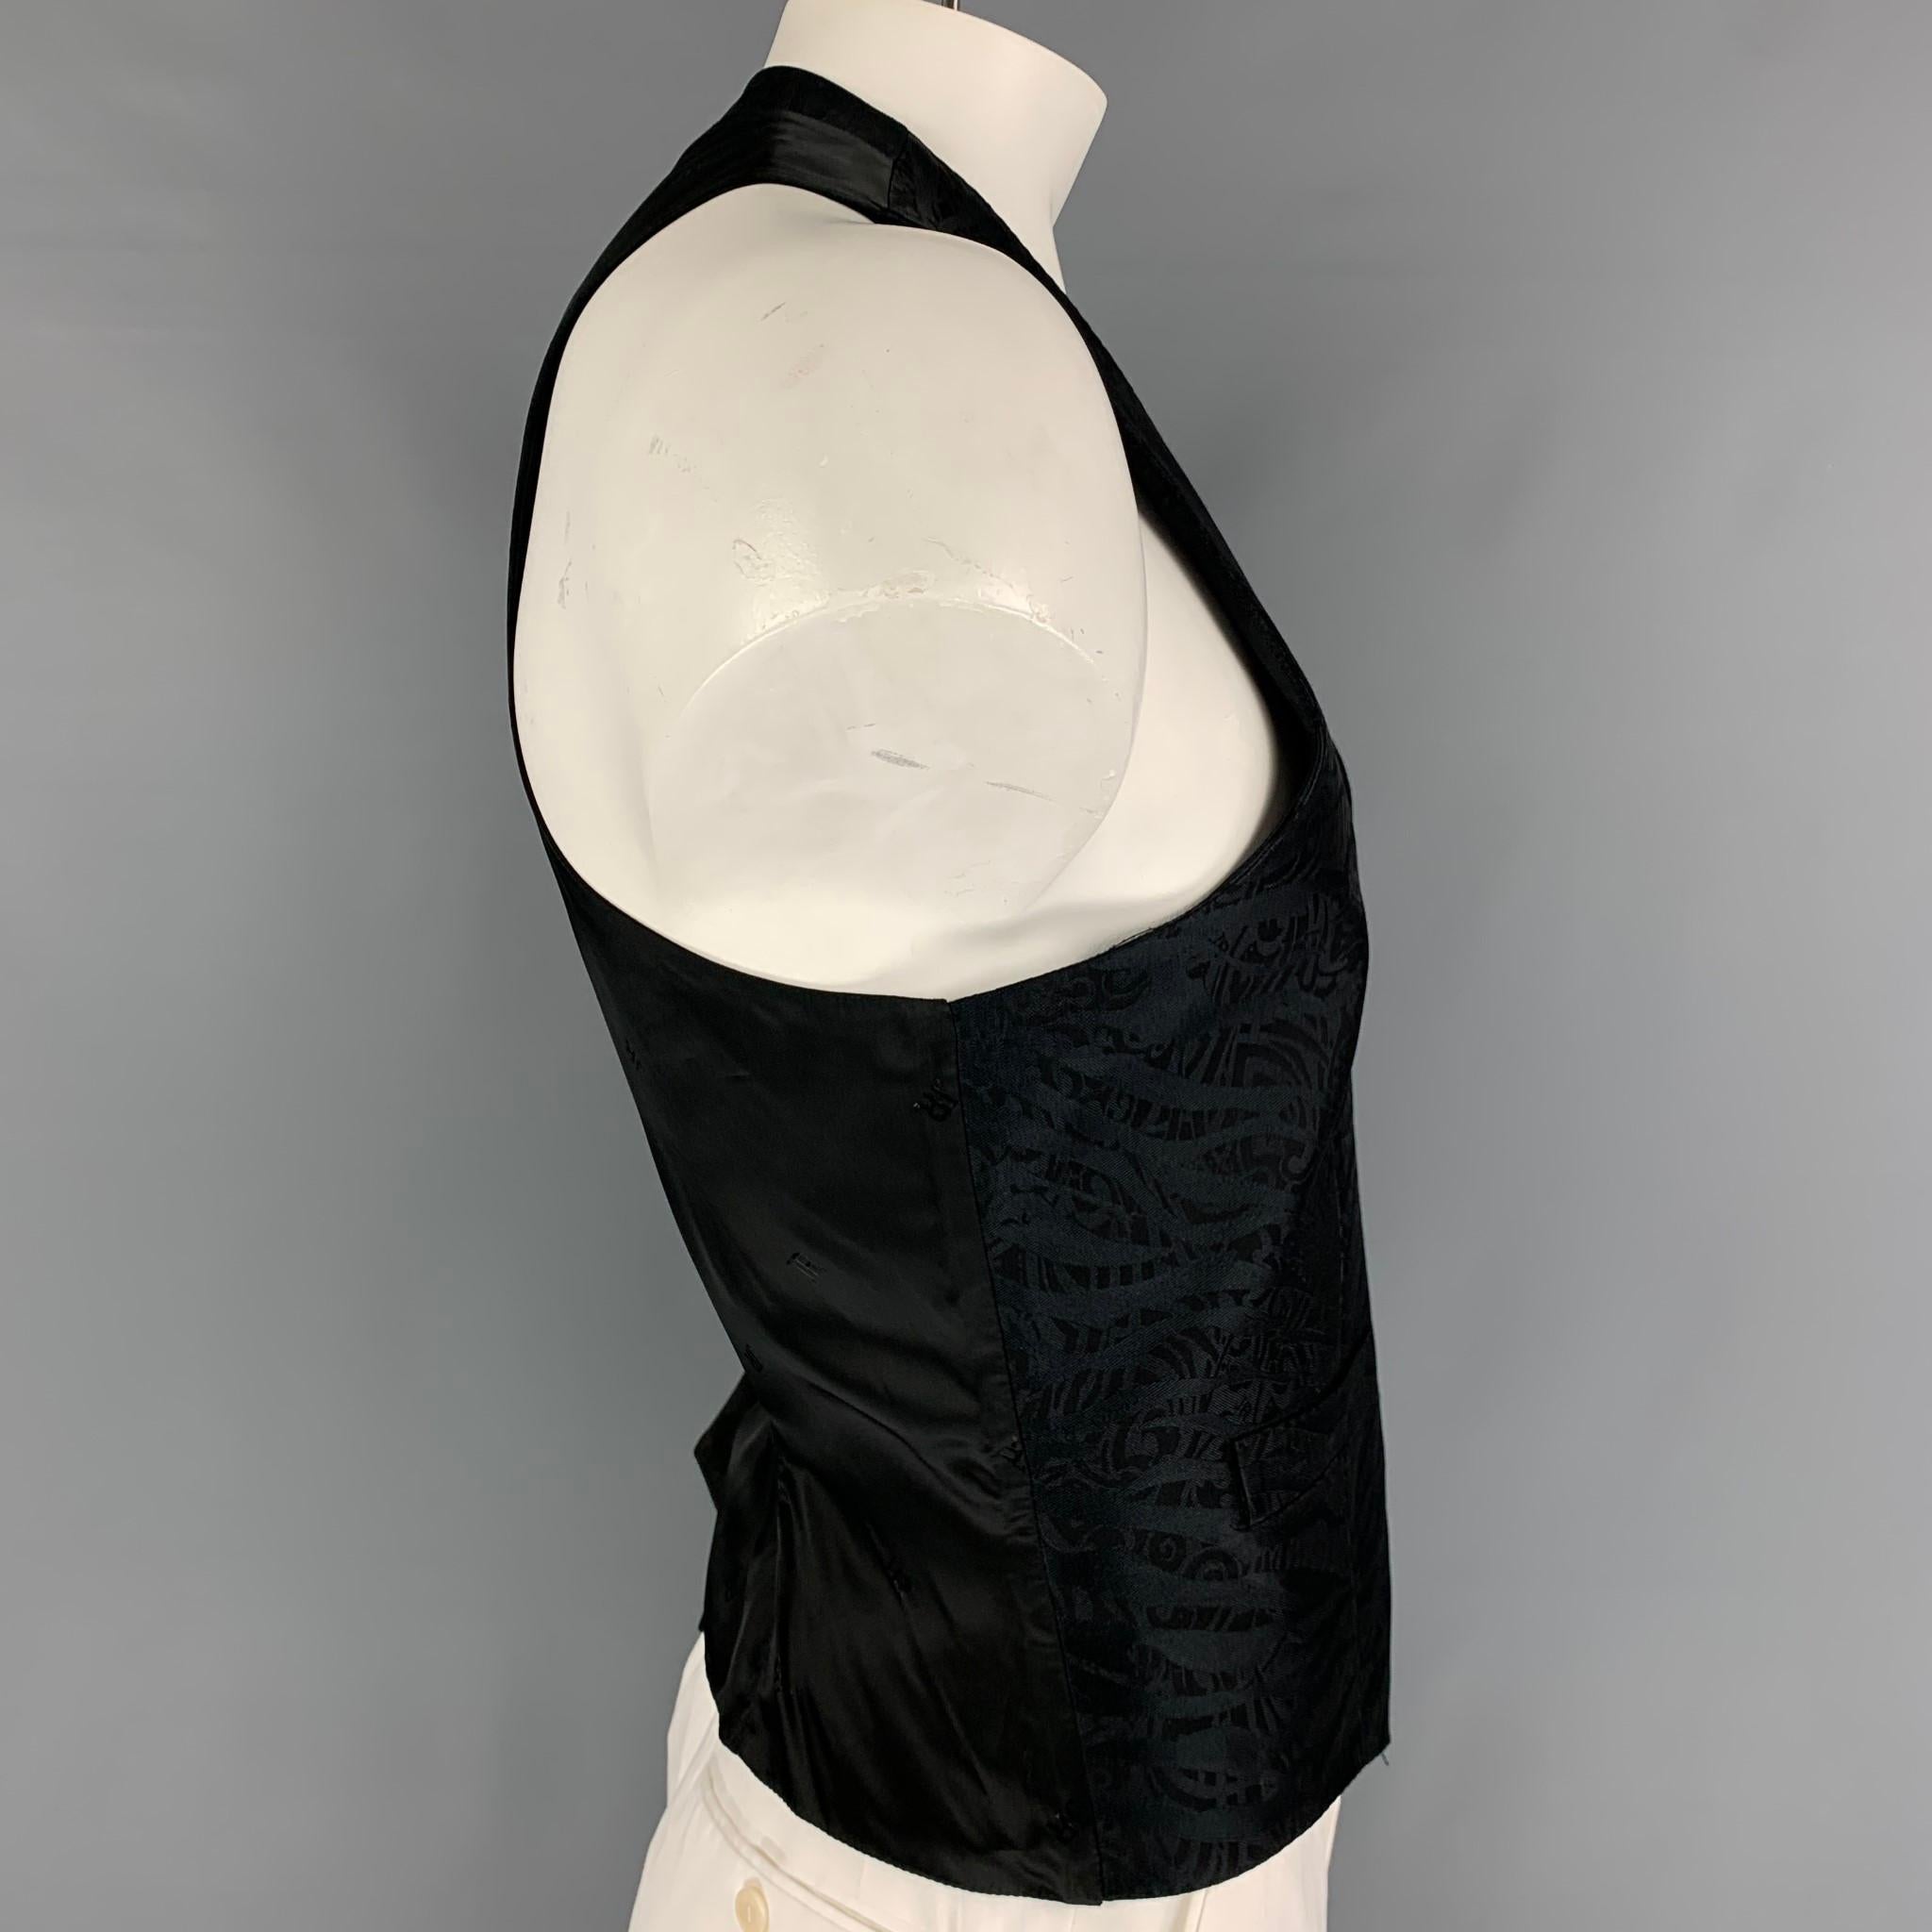 JOHN RICHMOND dress vest comes in a black jacquard polyester blend featuring a back belt, front pockets, and a buttoned closure. 

Very Good Pre-Owned Condition.
Marked: 54

Measurements:

Shoulder: 13.5 in.
Chest: 44 in.
Length: 22 in. 